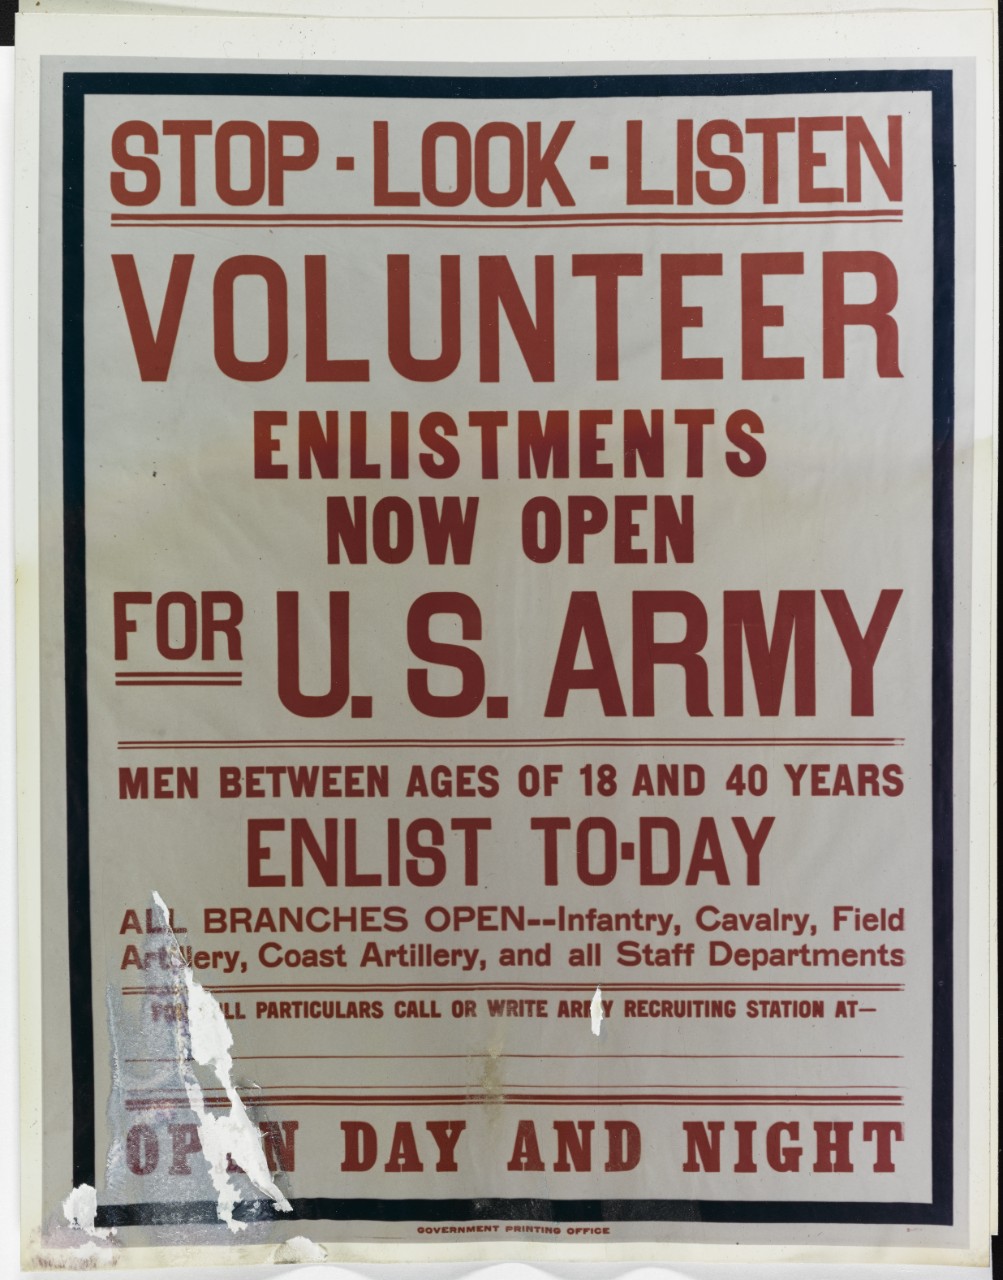 Army recruiting poster